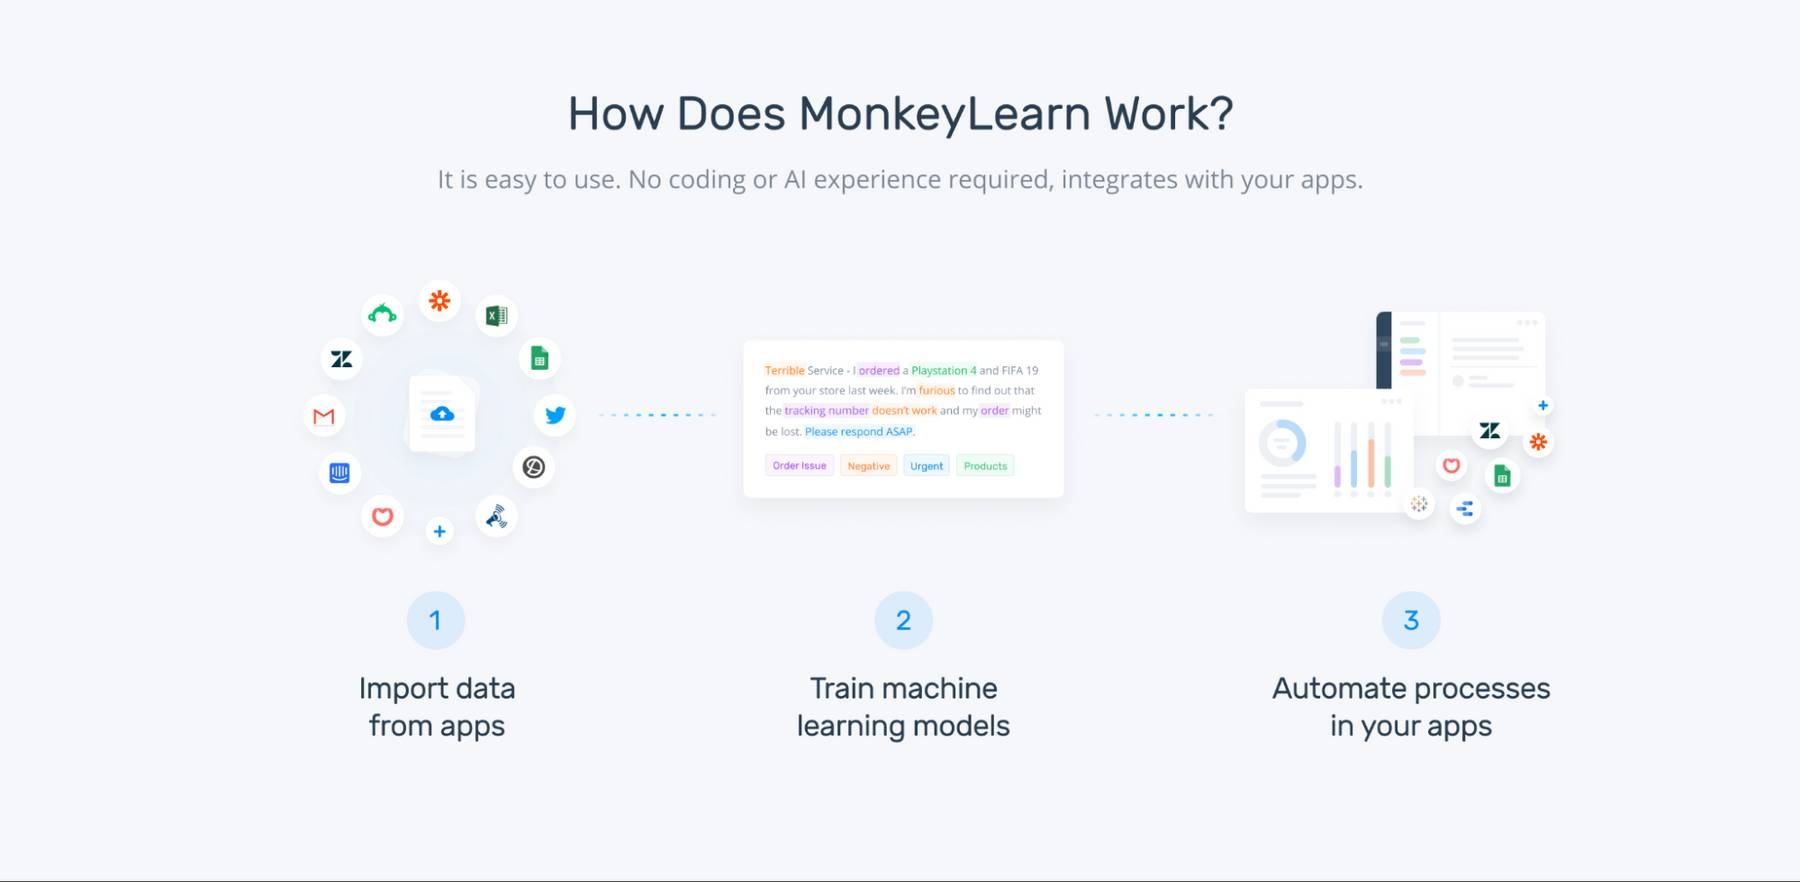 How MonkeyLearn's machine learning models work: Import data, train your model and analyze data, automate your processes.